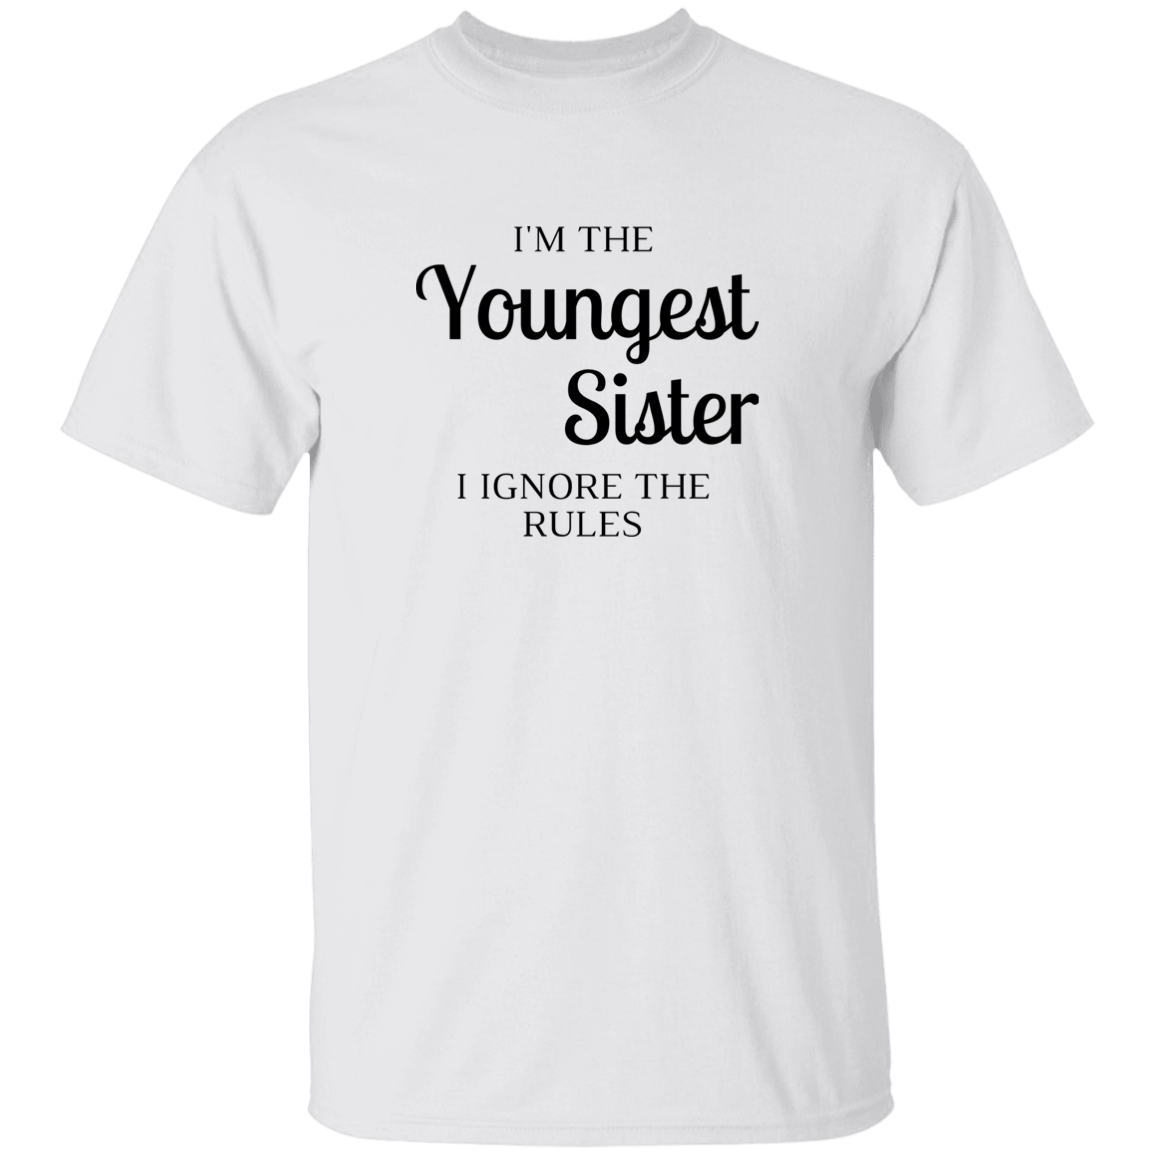 Youngest Sister - Ignore Rules